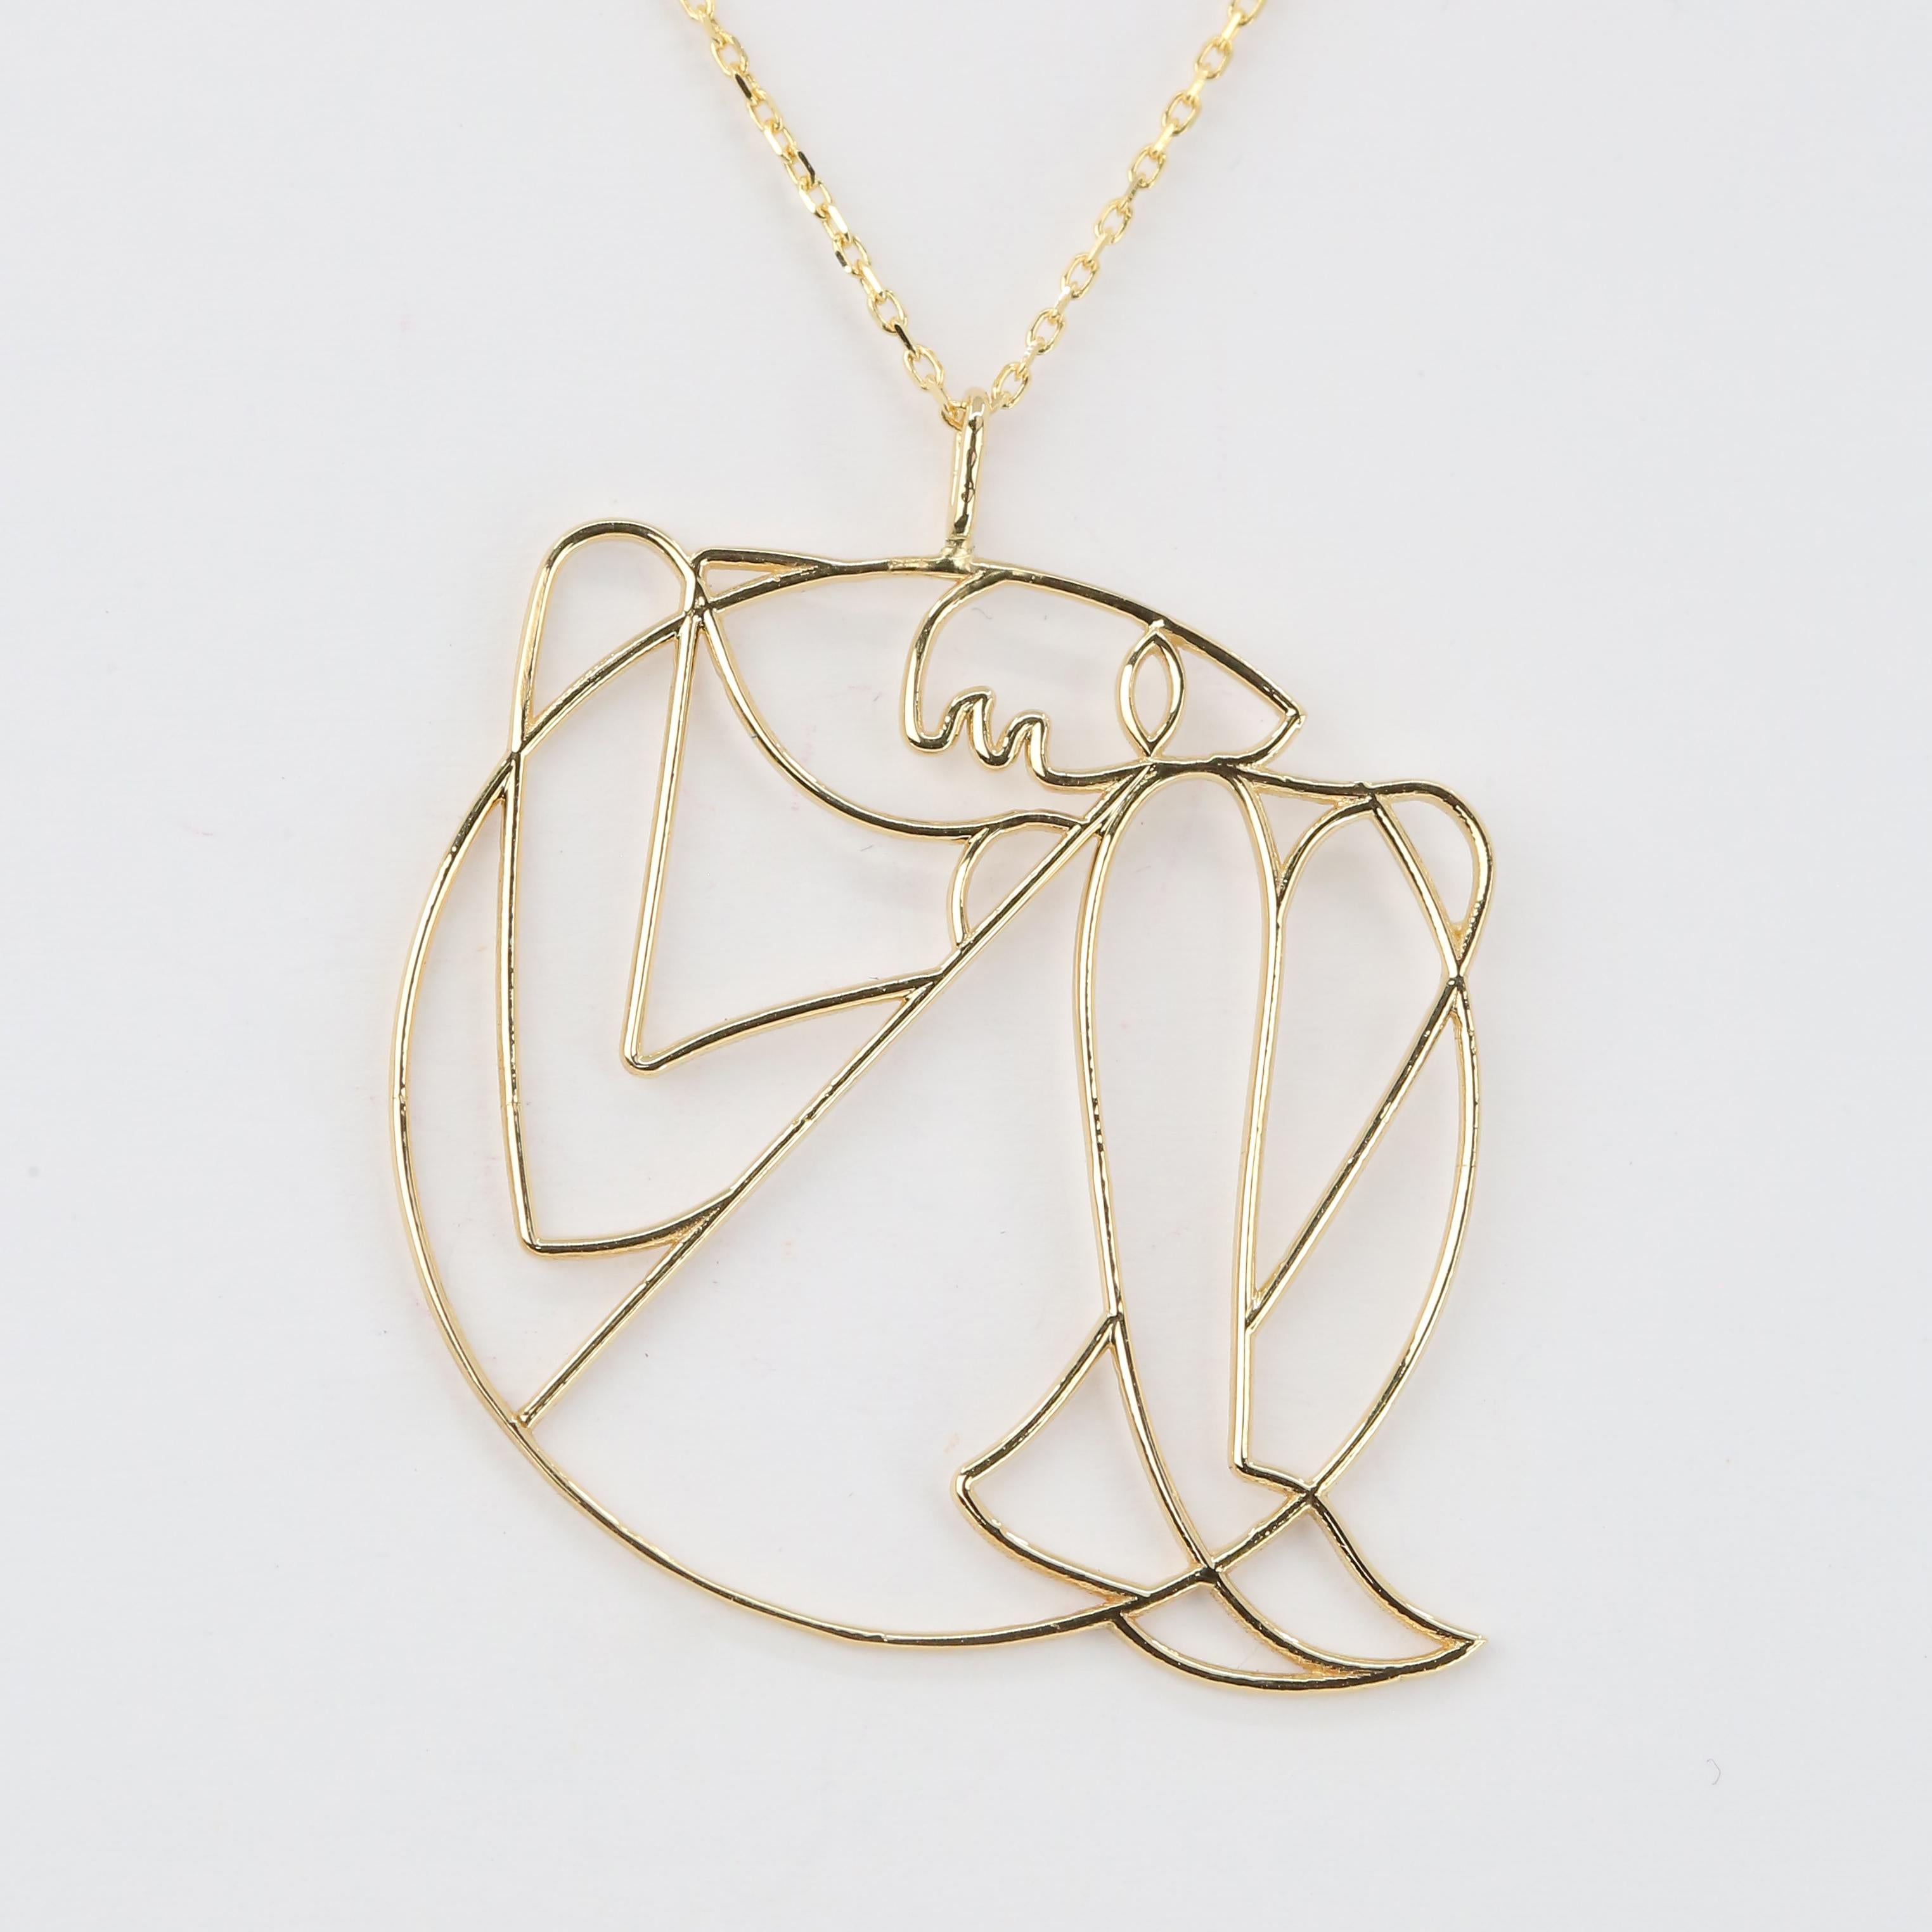 Human in the Womb in Fetal Position Necklace 14K Gold, Golden Ratio Necklace-Inspired by Leonardo Fibonacci - Professional Designer Necklace created by hands from every parts and every details.

This product was made with quality materials and